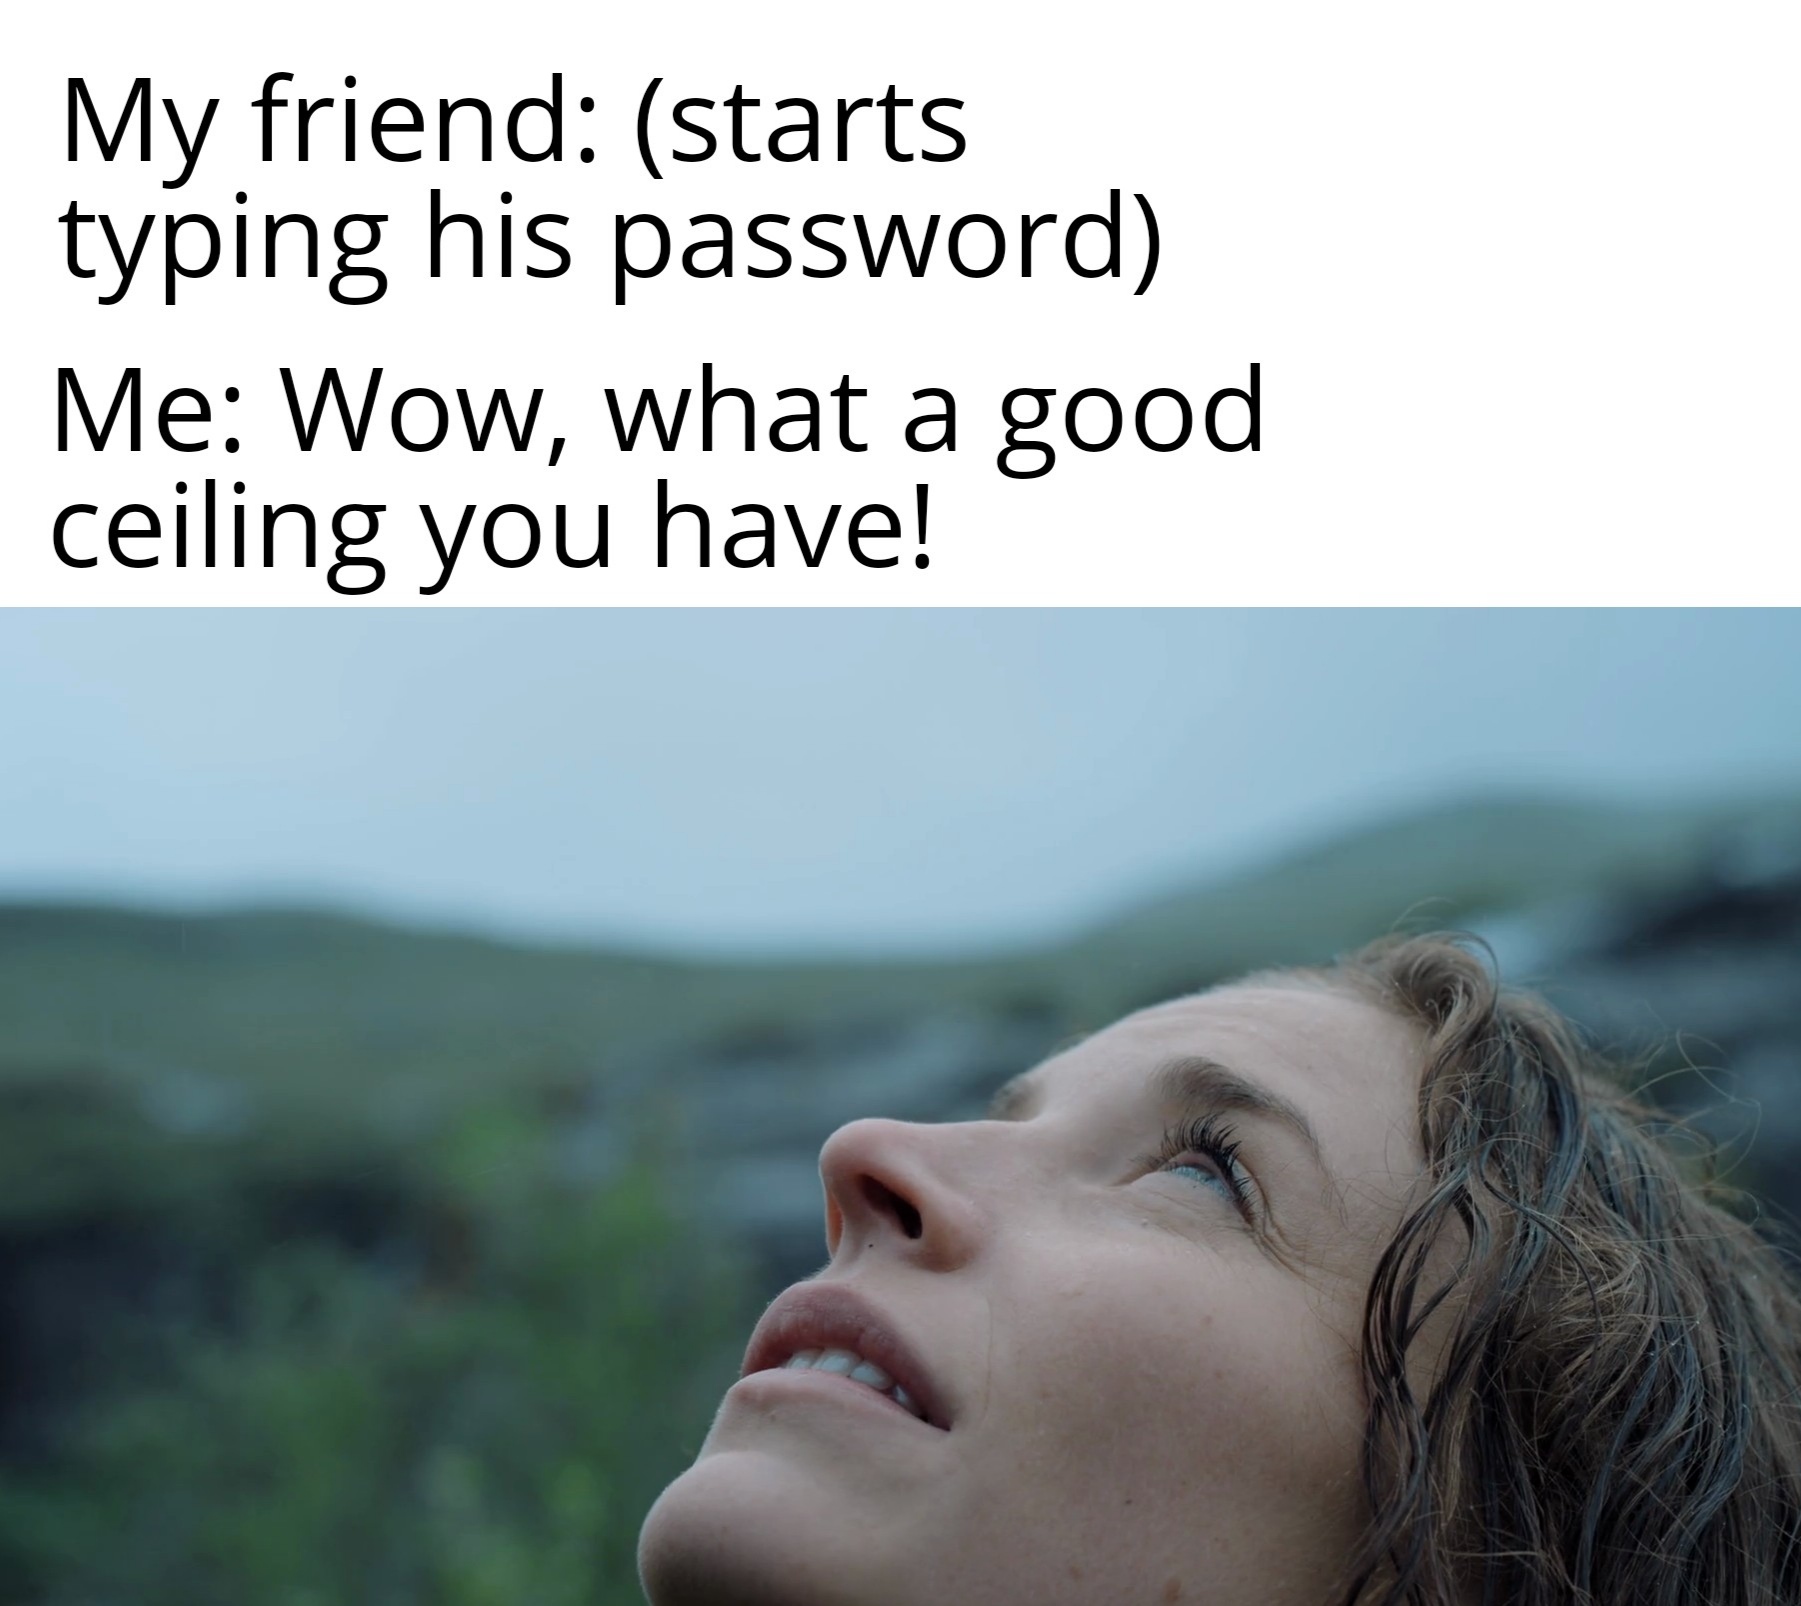 dank memes - Nature - My friend starts typing his password Me Wow, what a good ceiling you have!